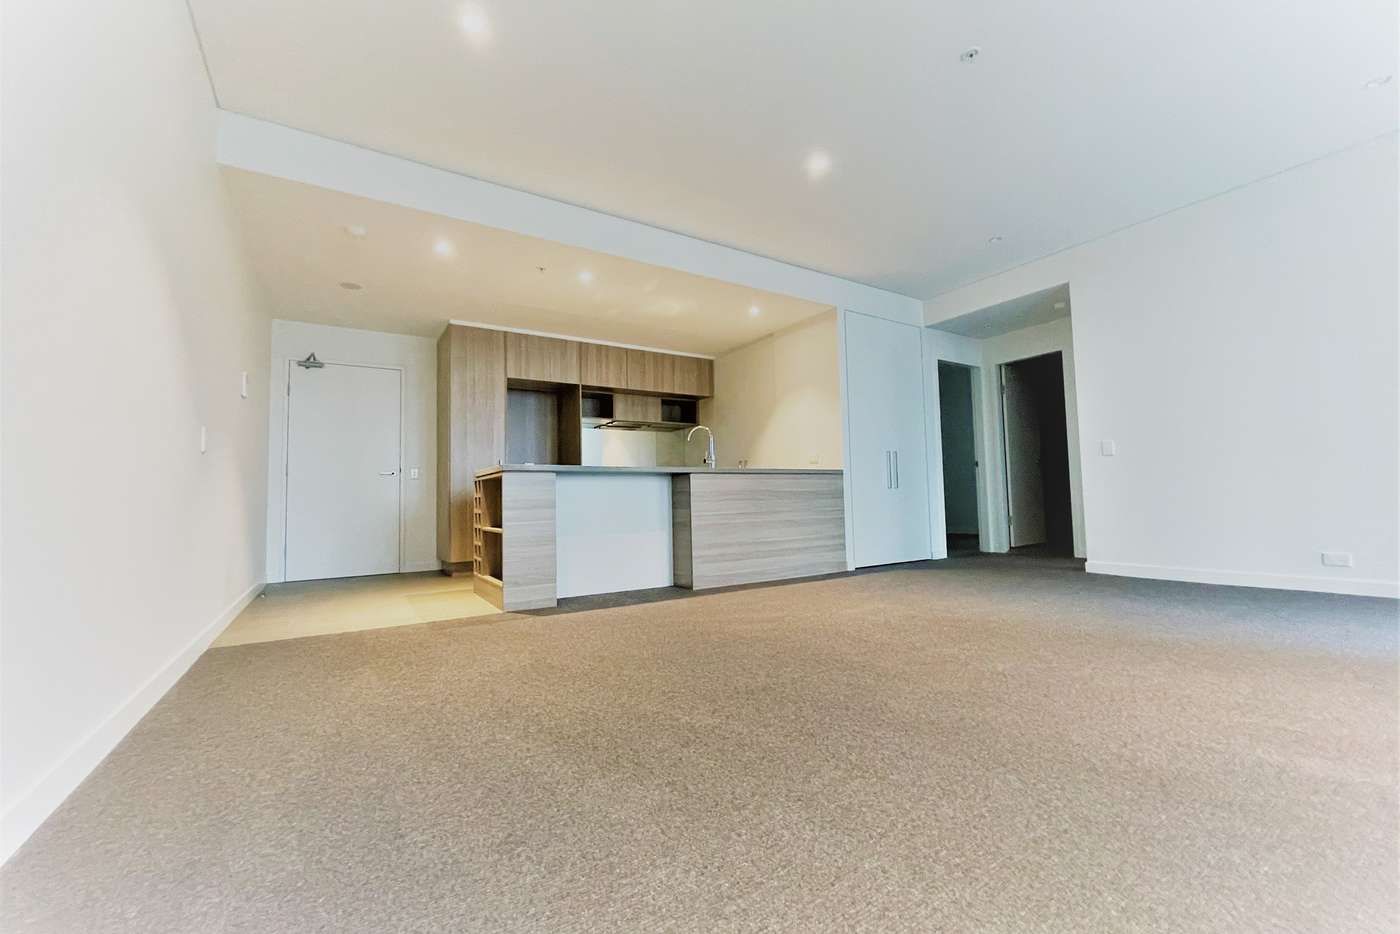 2 bedrooms Apartment / Unit / Flat in Level 7/5 Network Place NORTH RYDE NSW, 2113